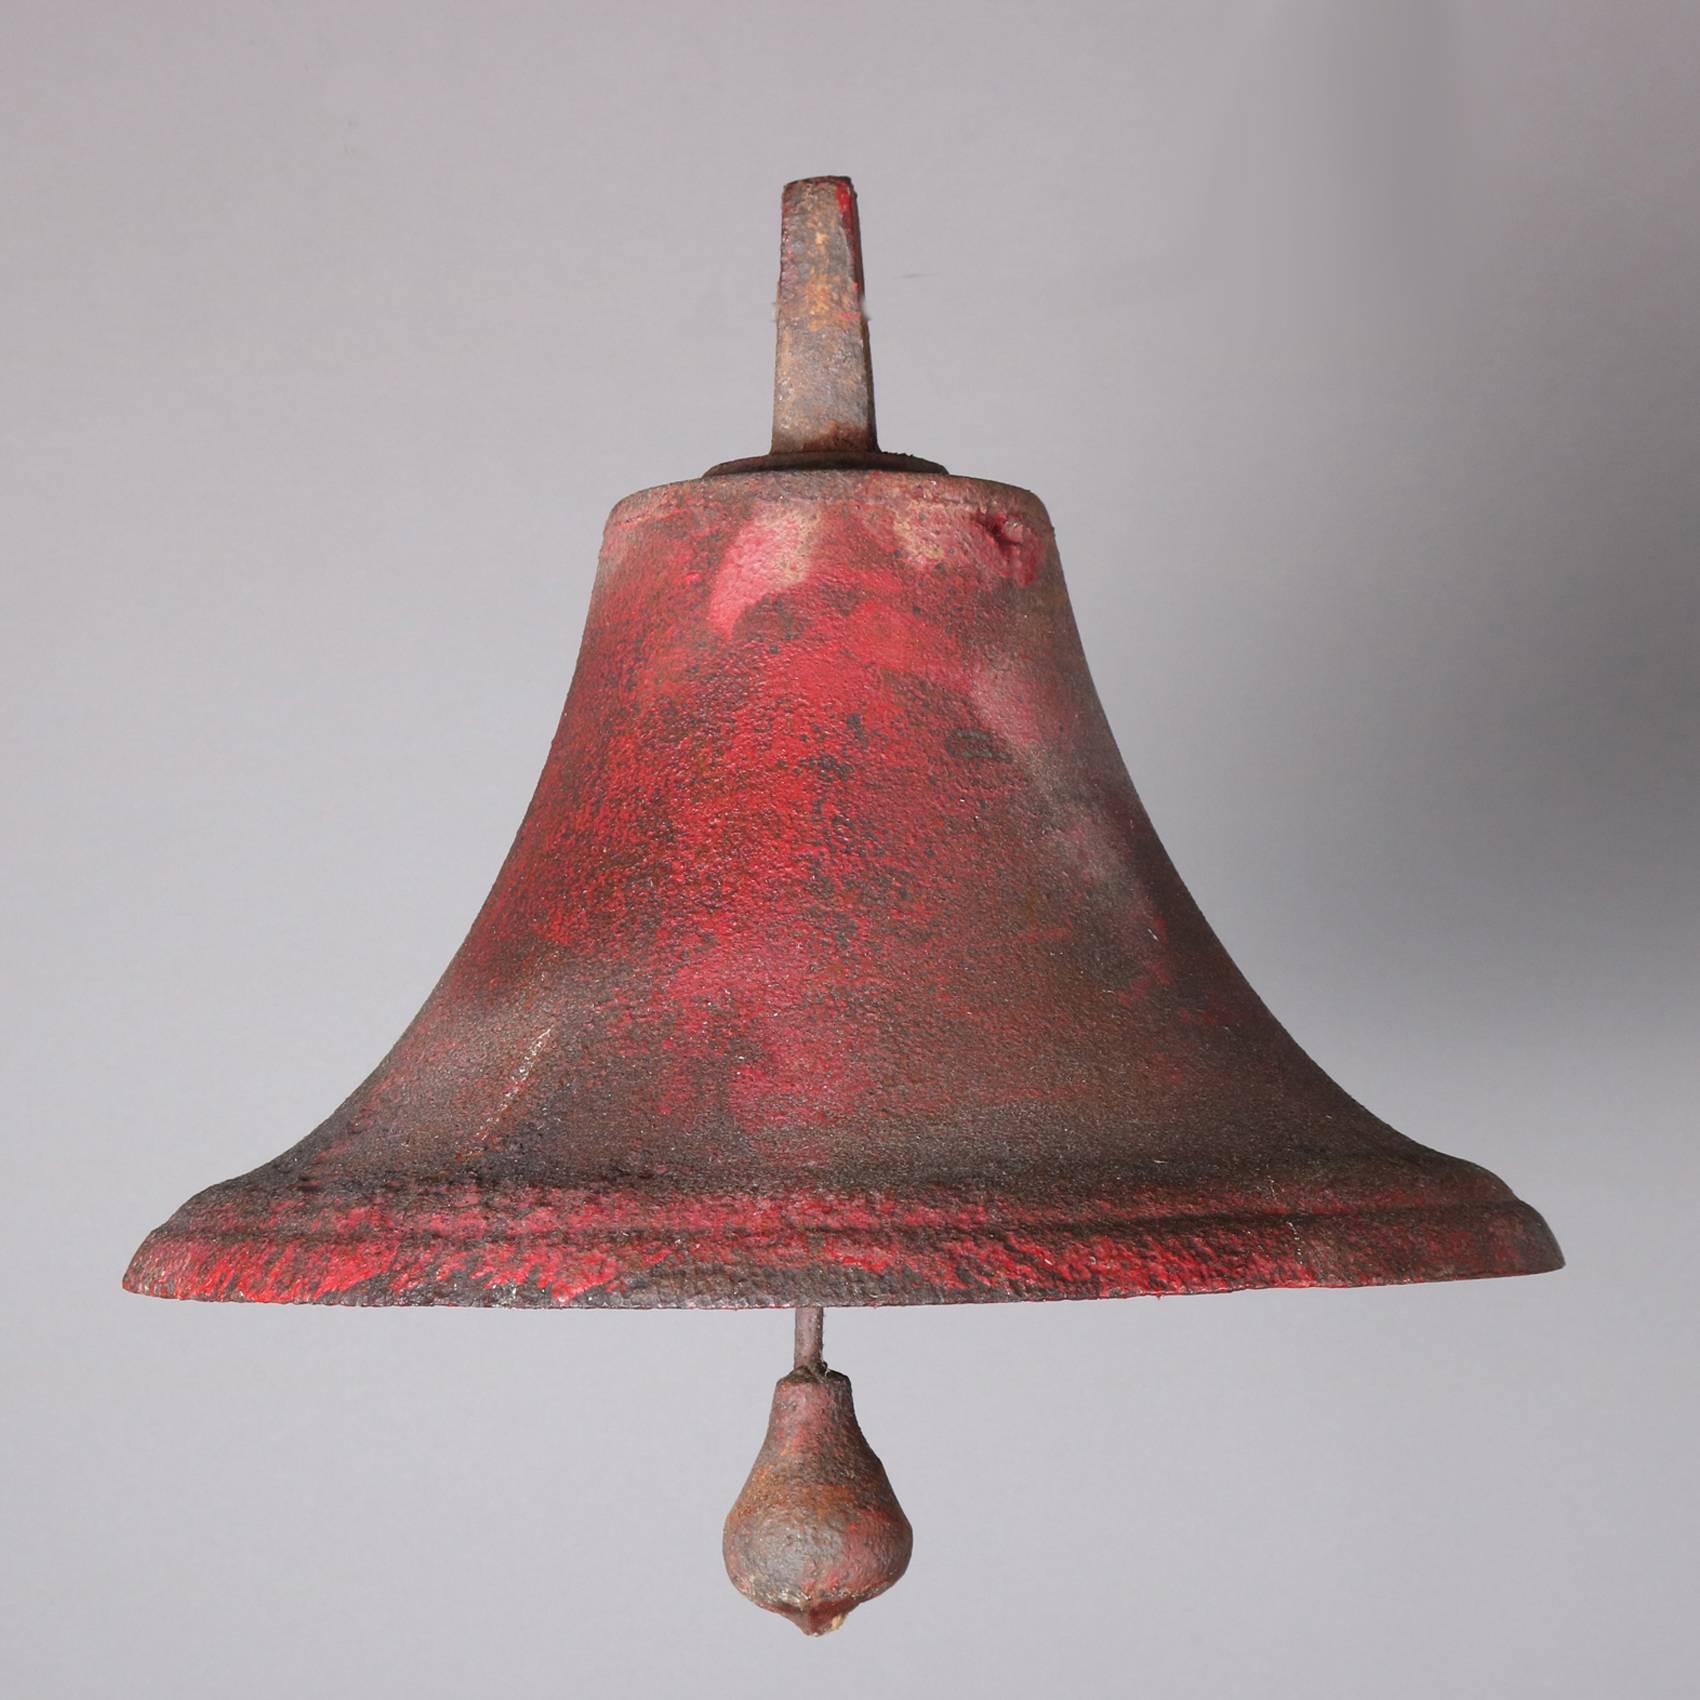 Early primitive antique cast iron school bell features original red paint and is signed on arms B. C. Taylor Dayton, O., includes original gong, industrial, dinner, court house, farm or school, 19th century

Measures - 19"H x 17"diam